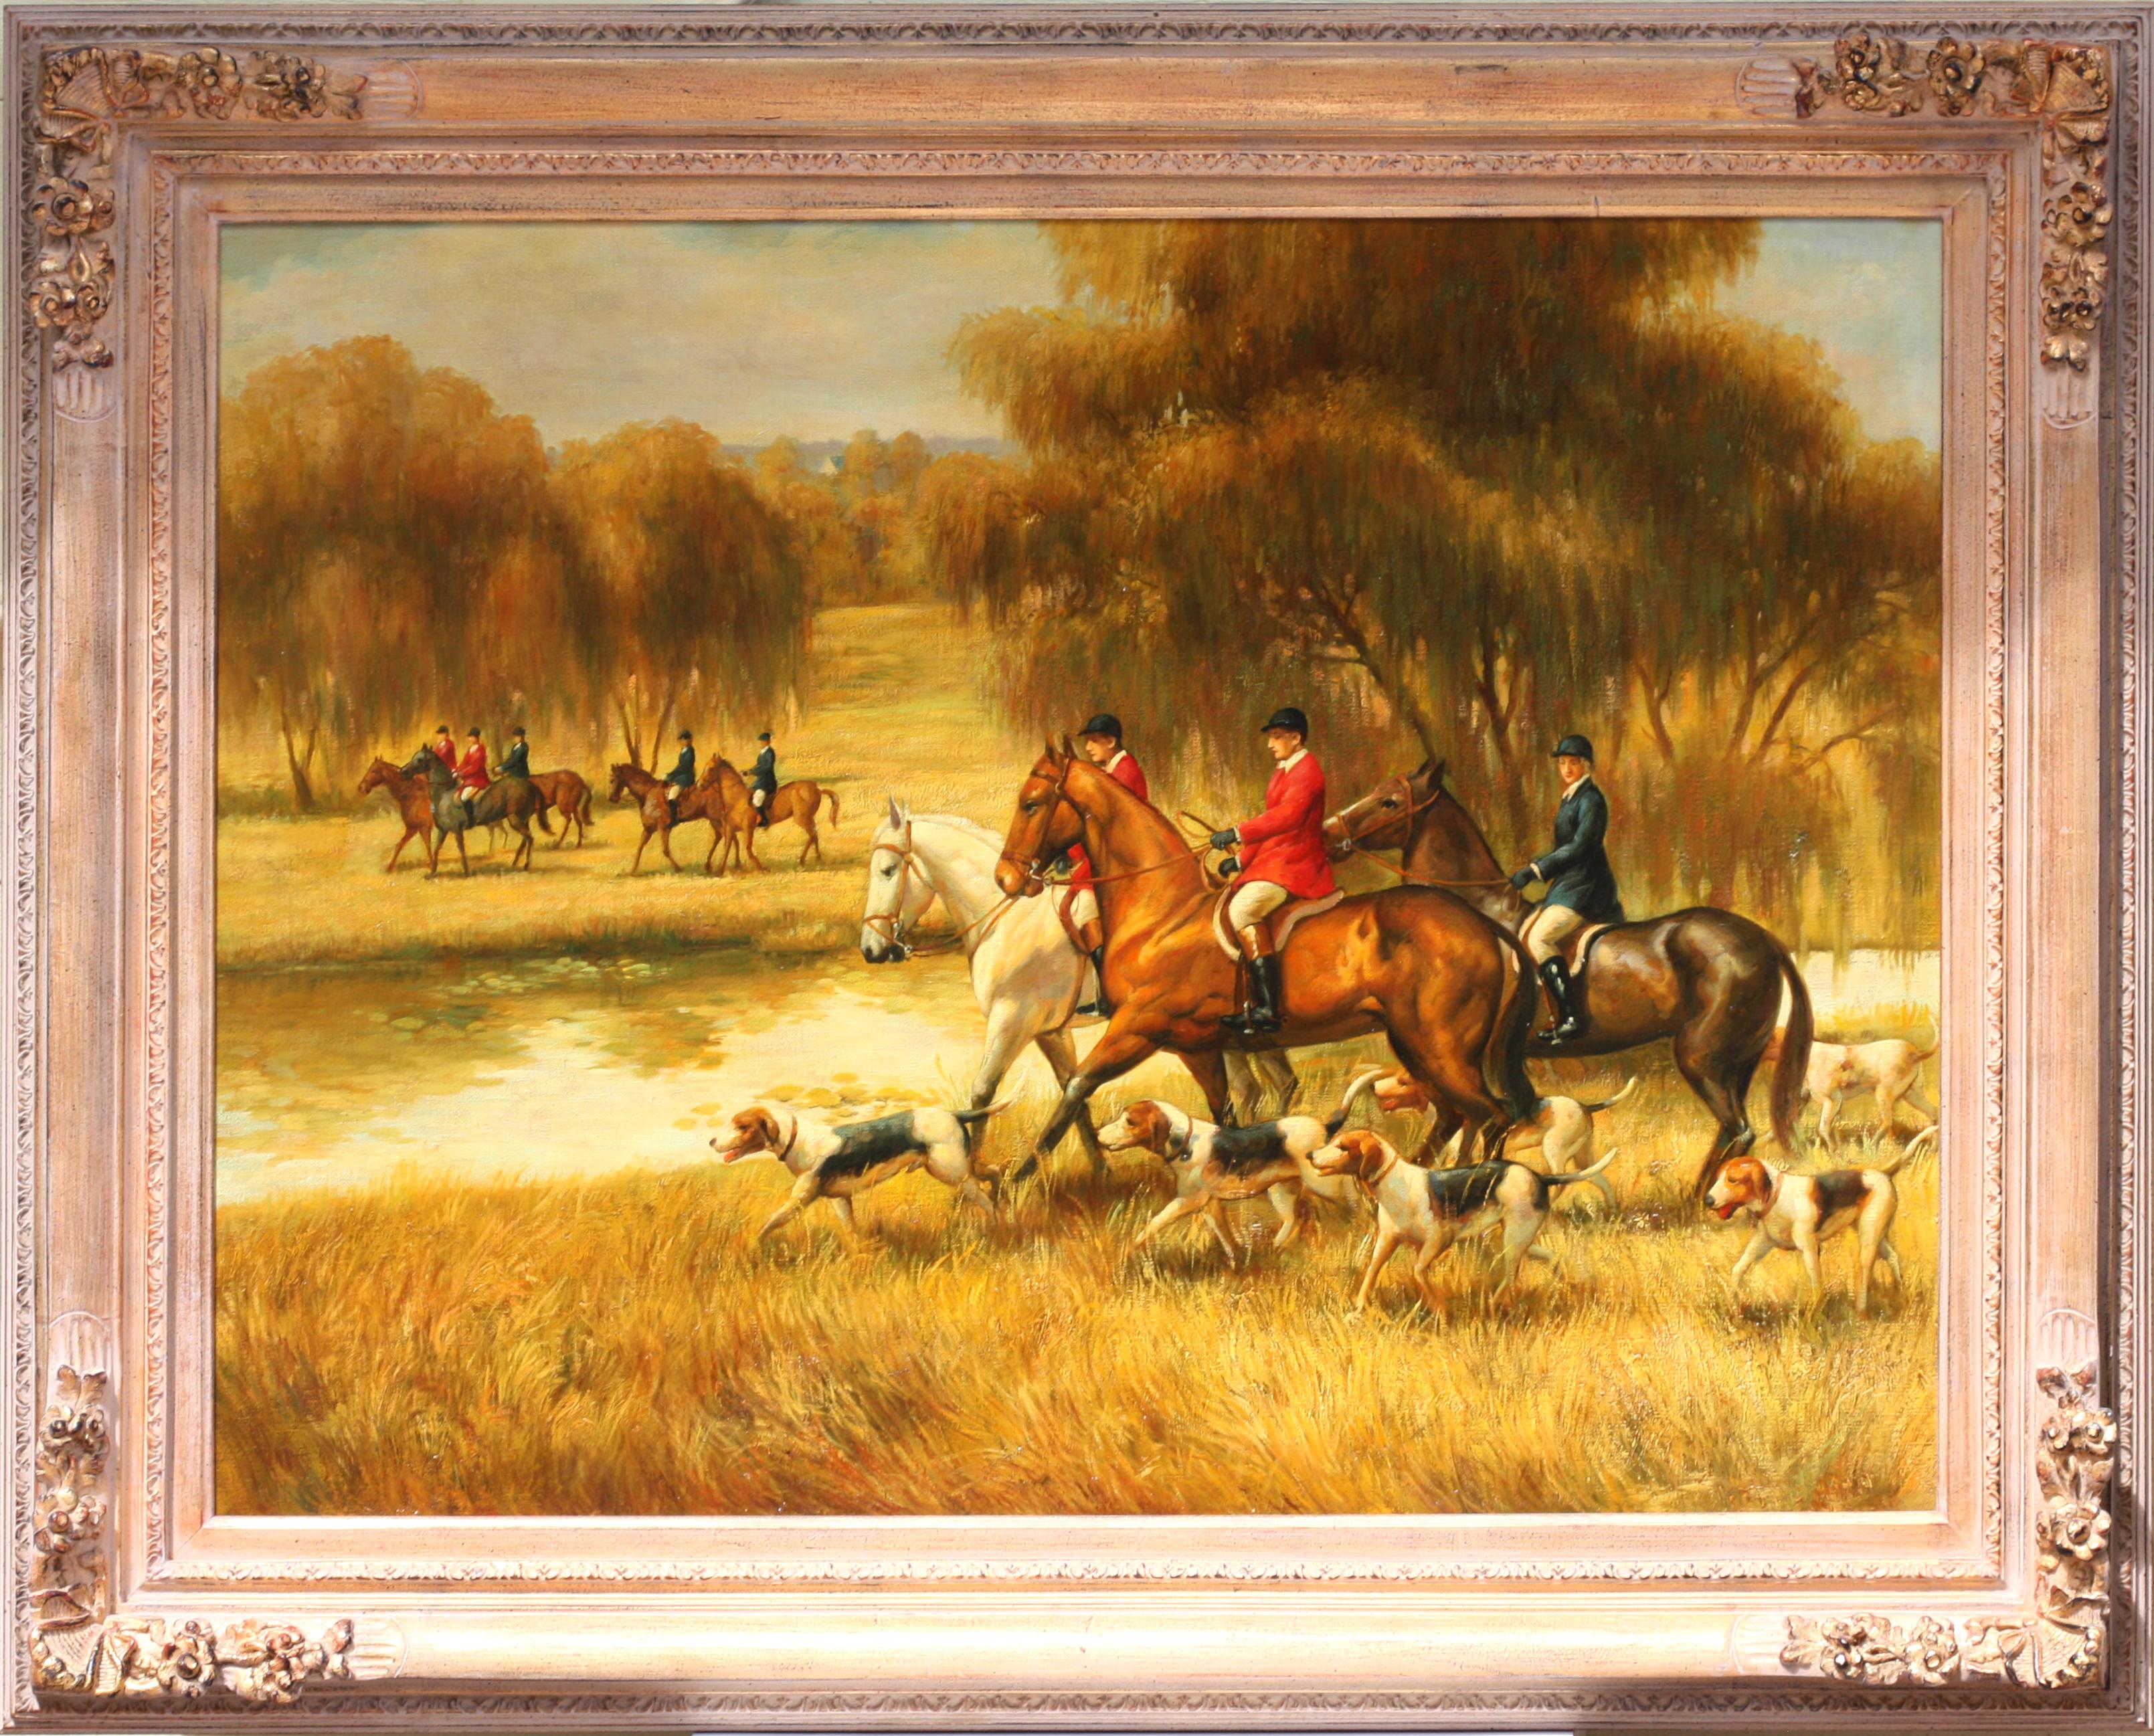 British/American School, 20th Century, Hunt Scene, The Start 
appears unsigned, oil on canvas
29 by 39 in. (73.66 by 99.06 cm.), overall in a gilt frame, 39 by 49 in. (99.06 by 124.46 cm.)
Provenance: Prestige Fine Art, Coral Springs, FL.